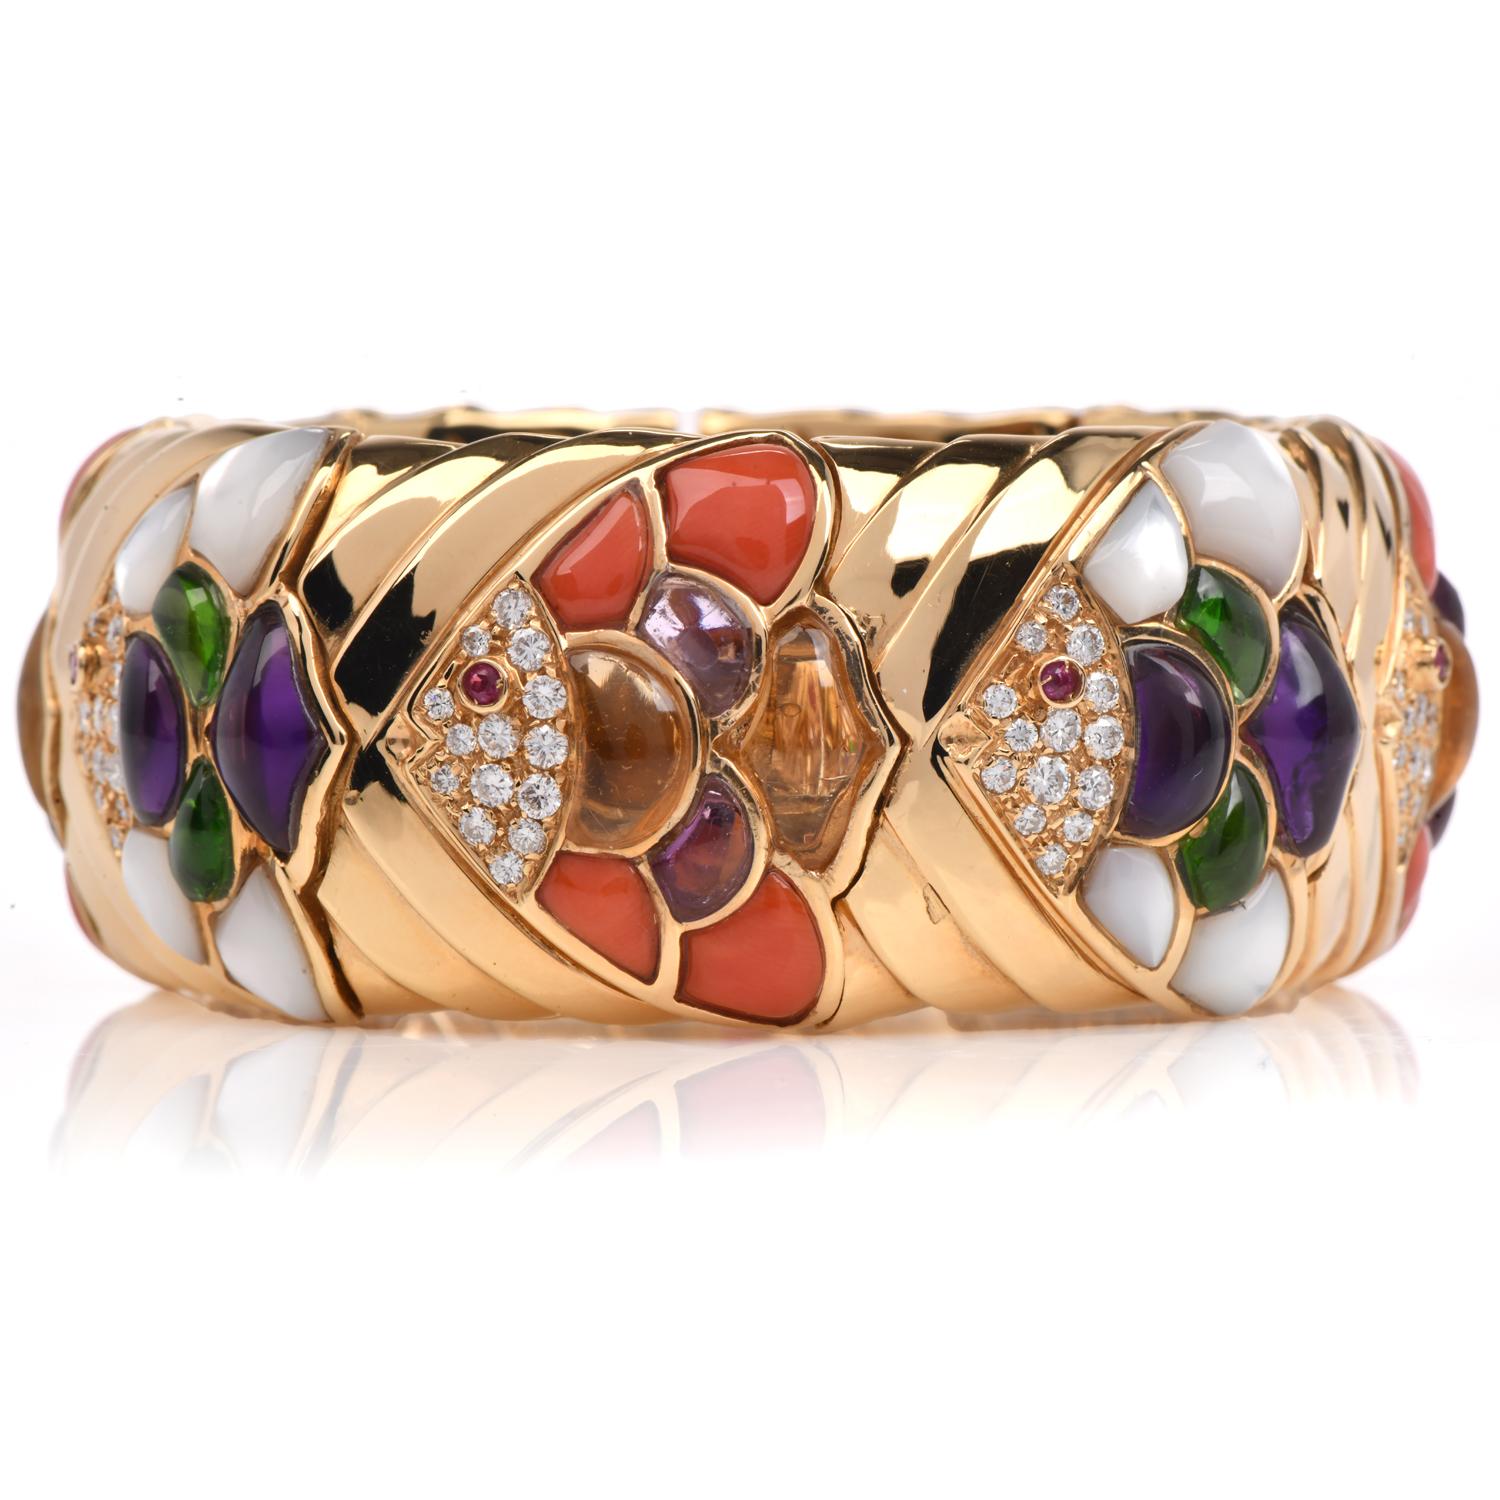 This Heavy Naturalia 18K Gold cuff Bracelet, is the perfect complement for any ensemble. It weighs a hefty 133.3 grams 

This Italian 1990s Well-Made Piece is expertly crafted in solid heavy 18K yellow gold, featuring Coral, Amethyst, Peridot,